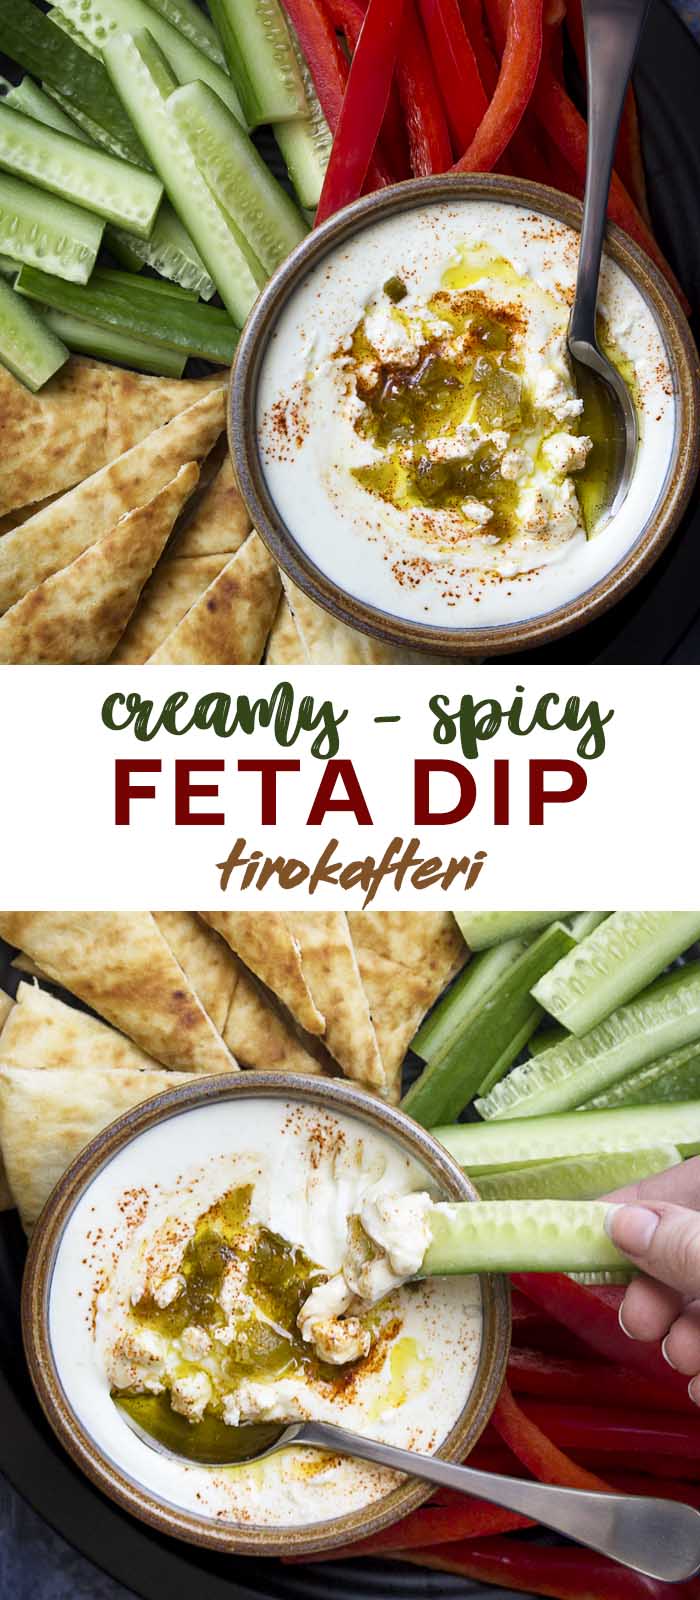 Bowls of dip surrounded by veggies and bread with text overlay - Feta Dip.